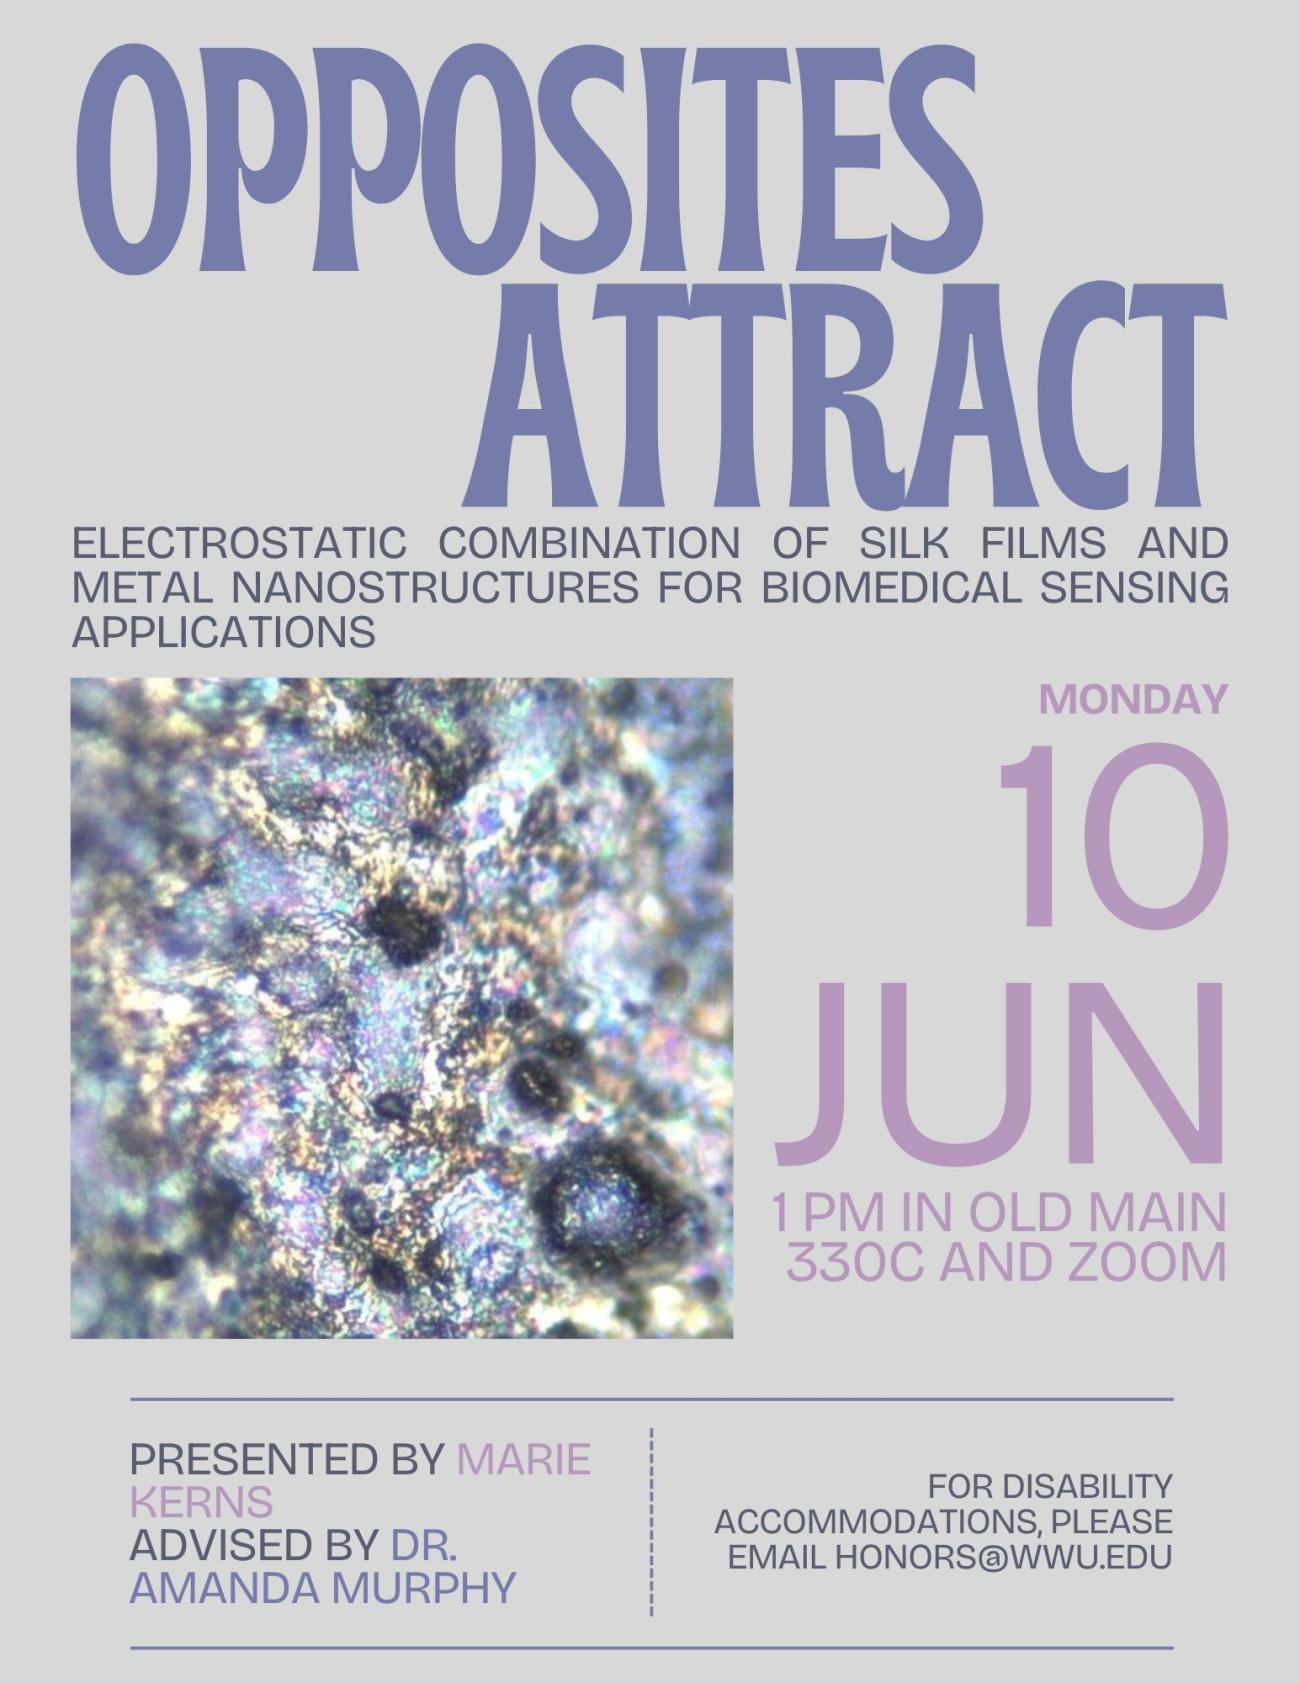 An optical microscope picture displays metal nanostructures which appear as a shiny surface with iridescent blues, greens, pinks, and gold. Text reads “Opposites Attract, the electrostatic combination of silk films and metal nanostructures for biomedical sensing applications” in bold letters. Next to the image is text reading “Monday 10 Jun, 1 PM in Old Main 330C and zoom. Presented by Marie Kerns, Advised by Dr. Amanda Murphy” and “For disability accommodations, please email honors@wwu.edu”.